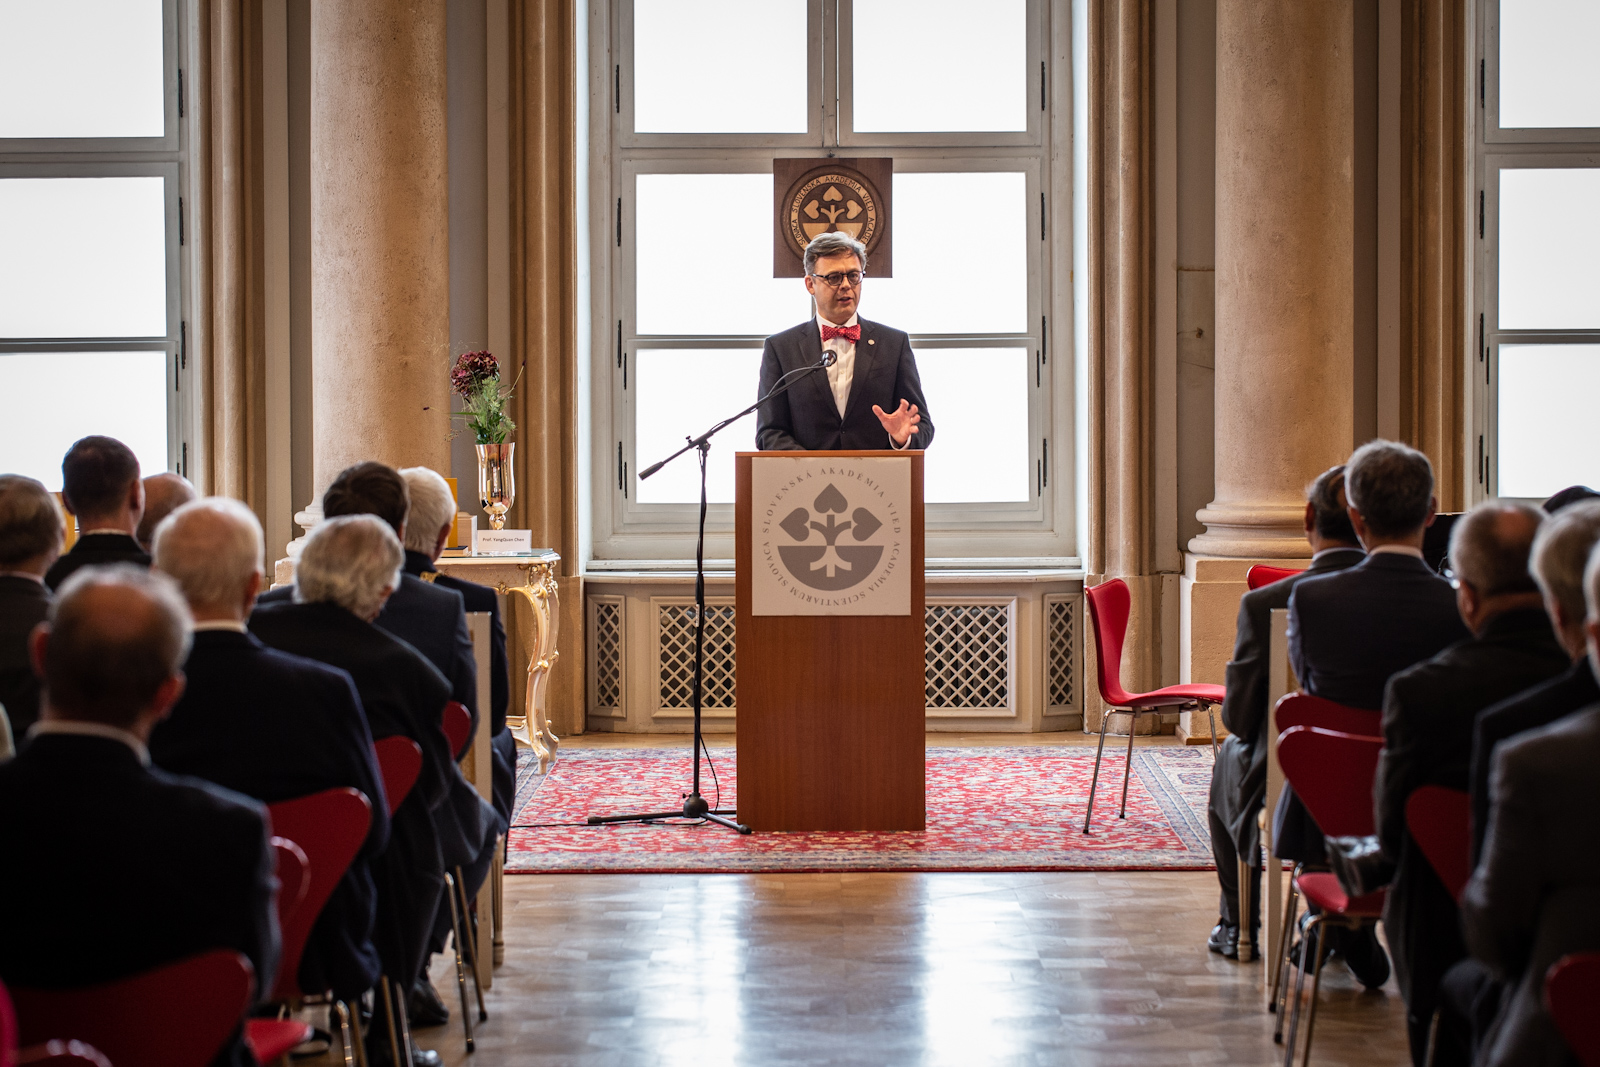 Prof. Salzet´s laudation was read by Tomáš Hromádka, the Deputy Vice-President of the SAS for International Relations, who was also the event host